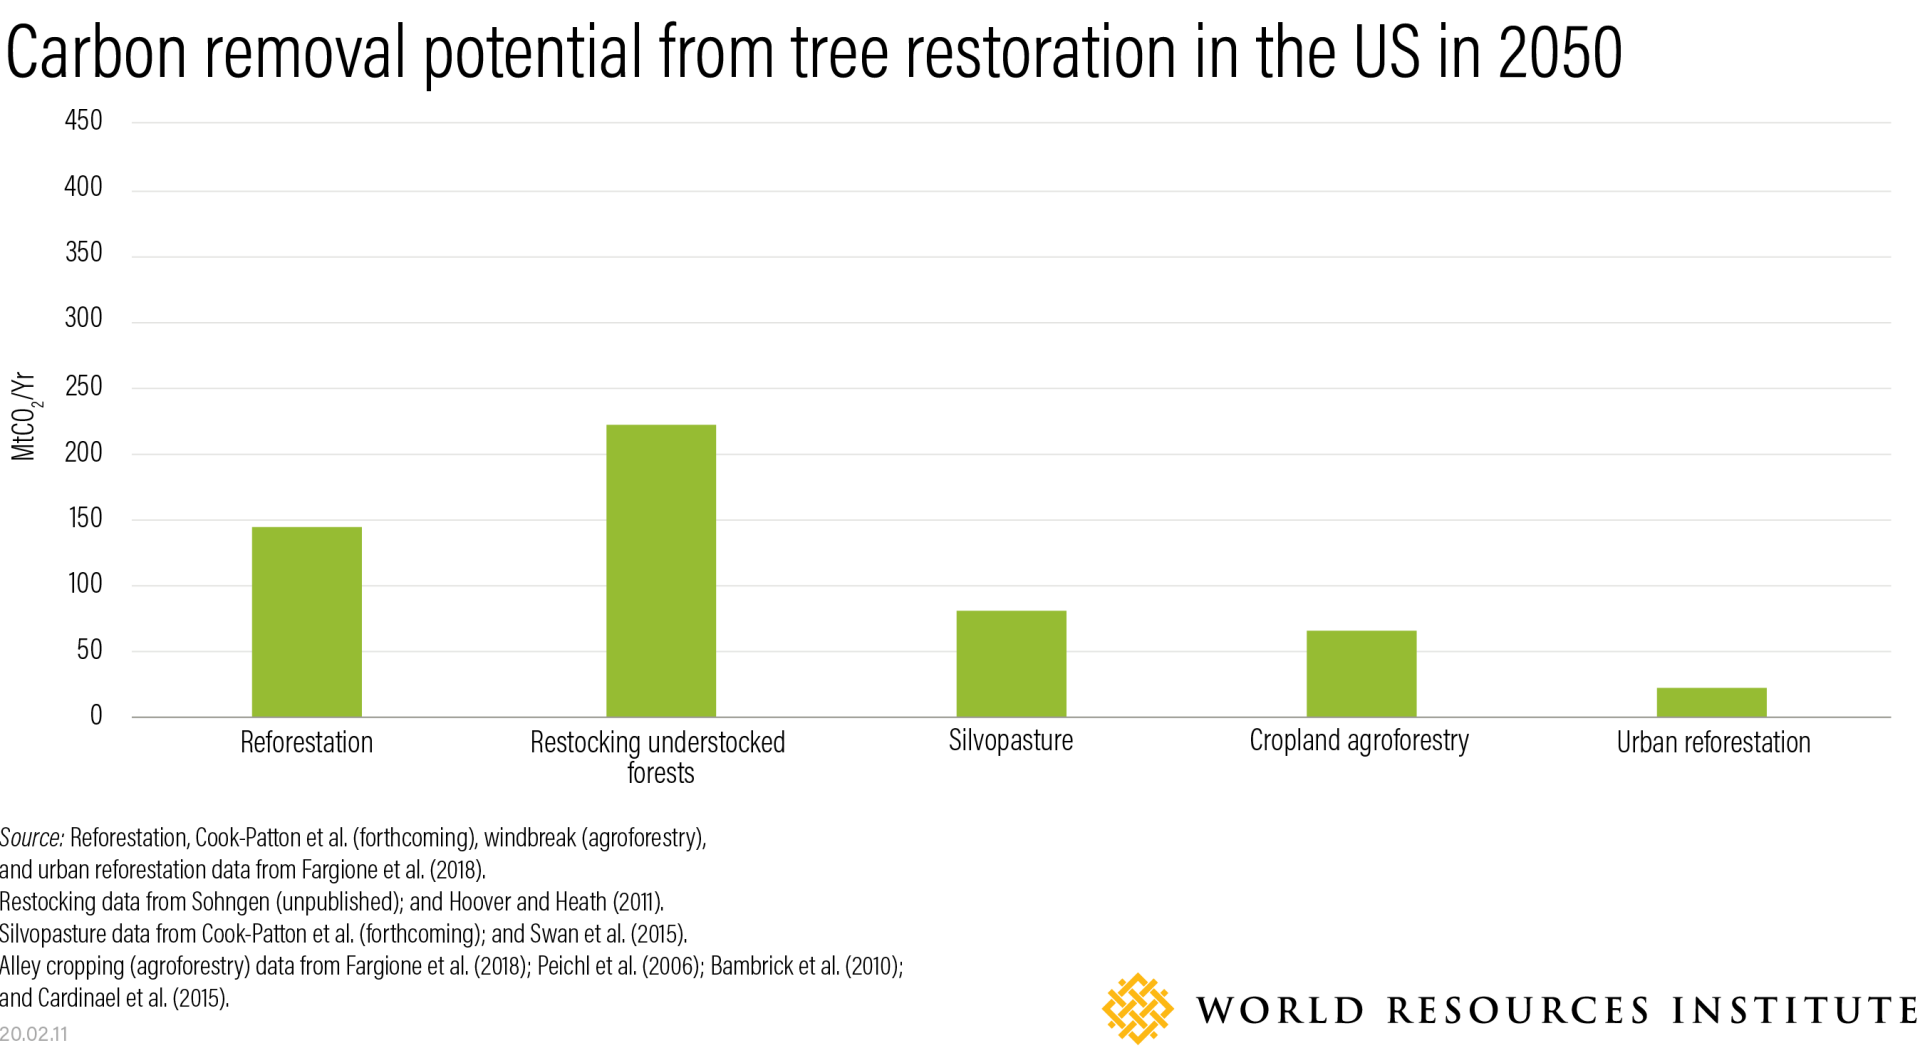 Graph showing carbon removal potential from tree restoration in the US